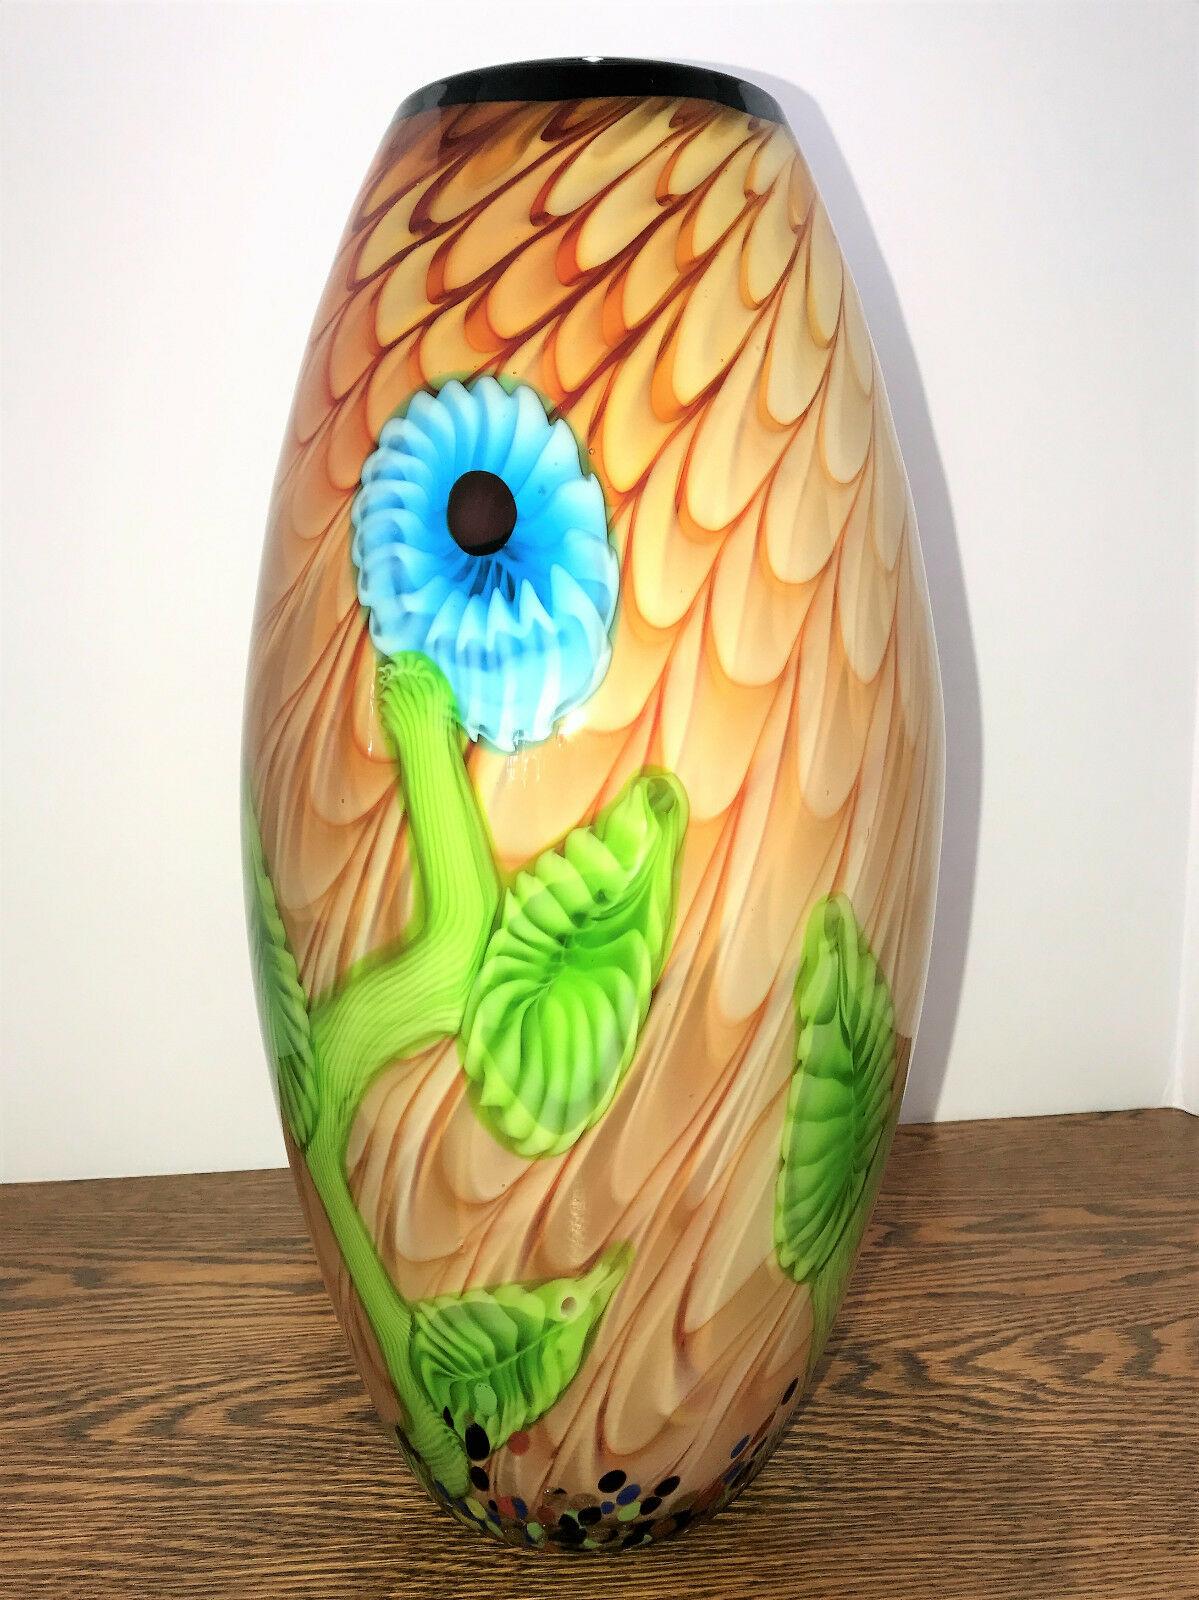 For the lovers of Murano, an alluring Floral design art glass vase. Simply beautiful, multi colors featuring an abstract flower design. Vase measures approx. 15 inches tall x 7 inches wide with a 24